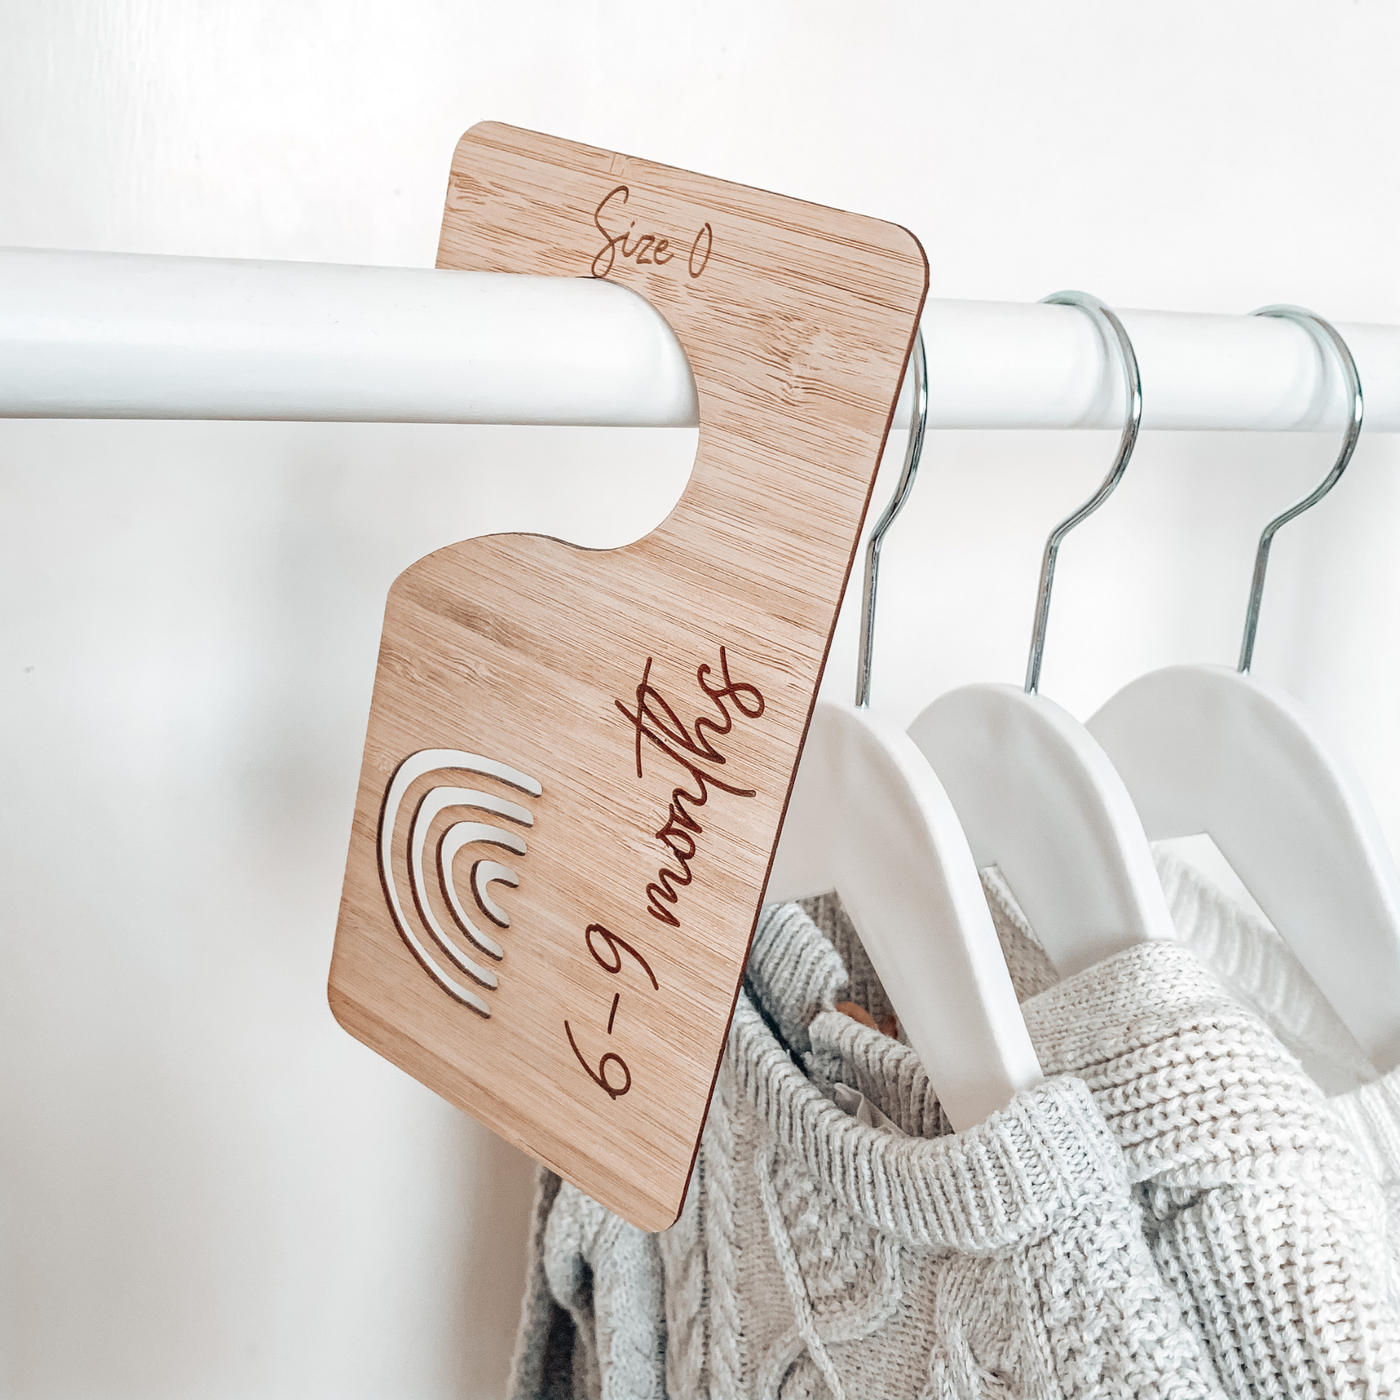 Wardrobe & clothes dividers/ hangers